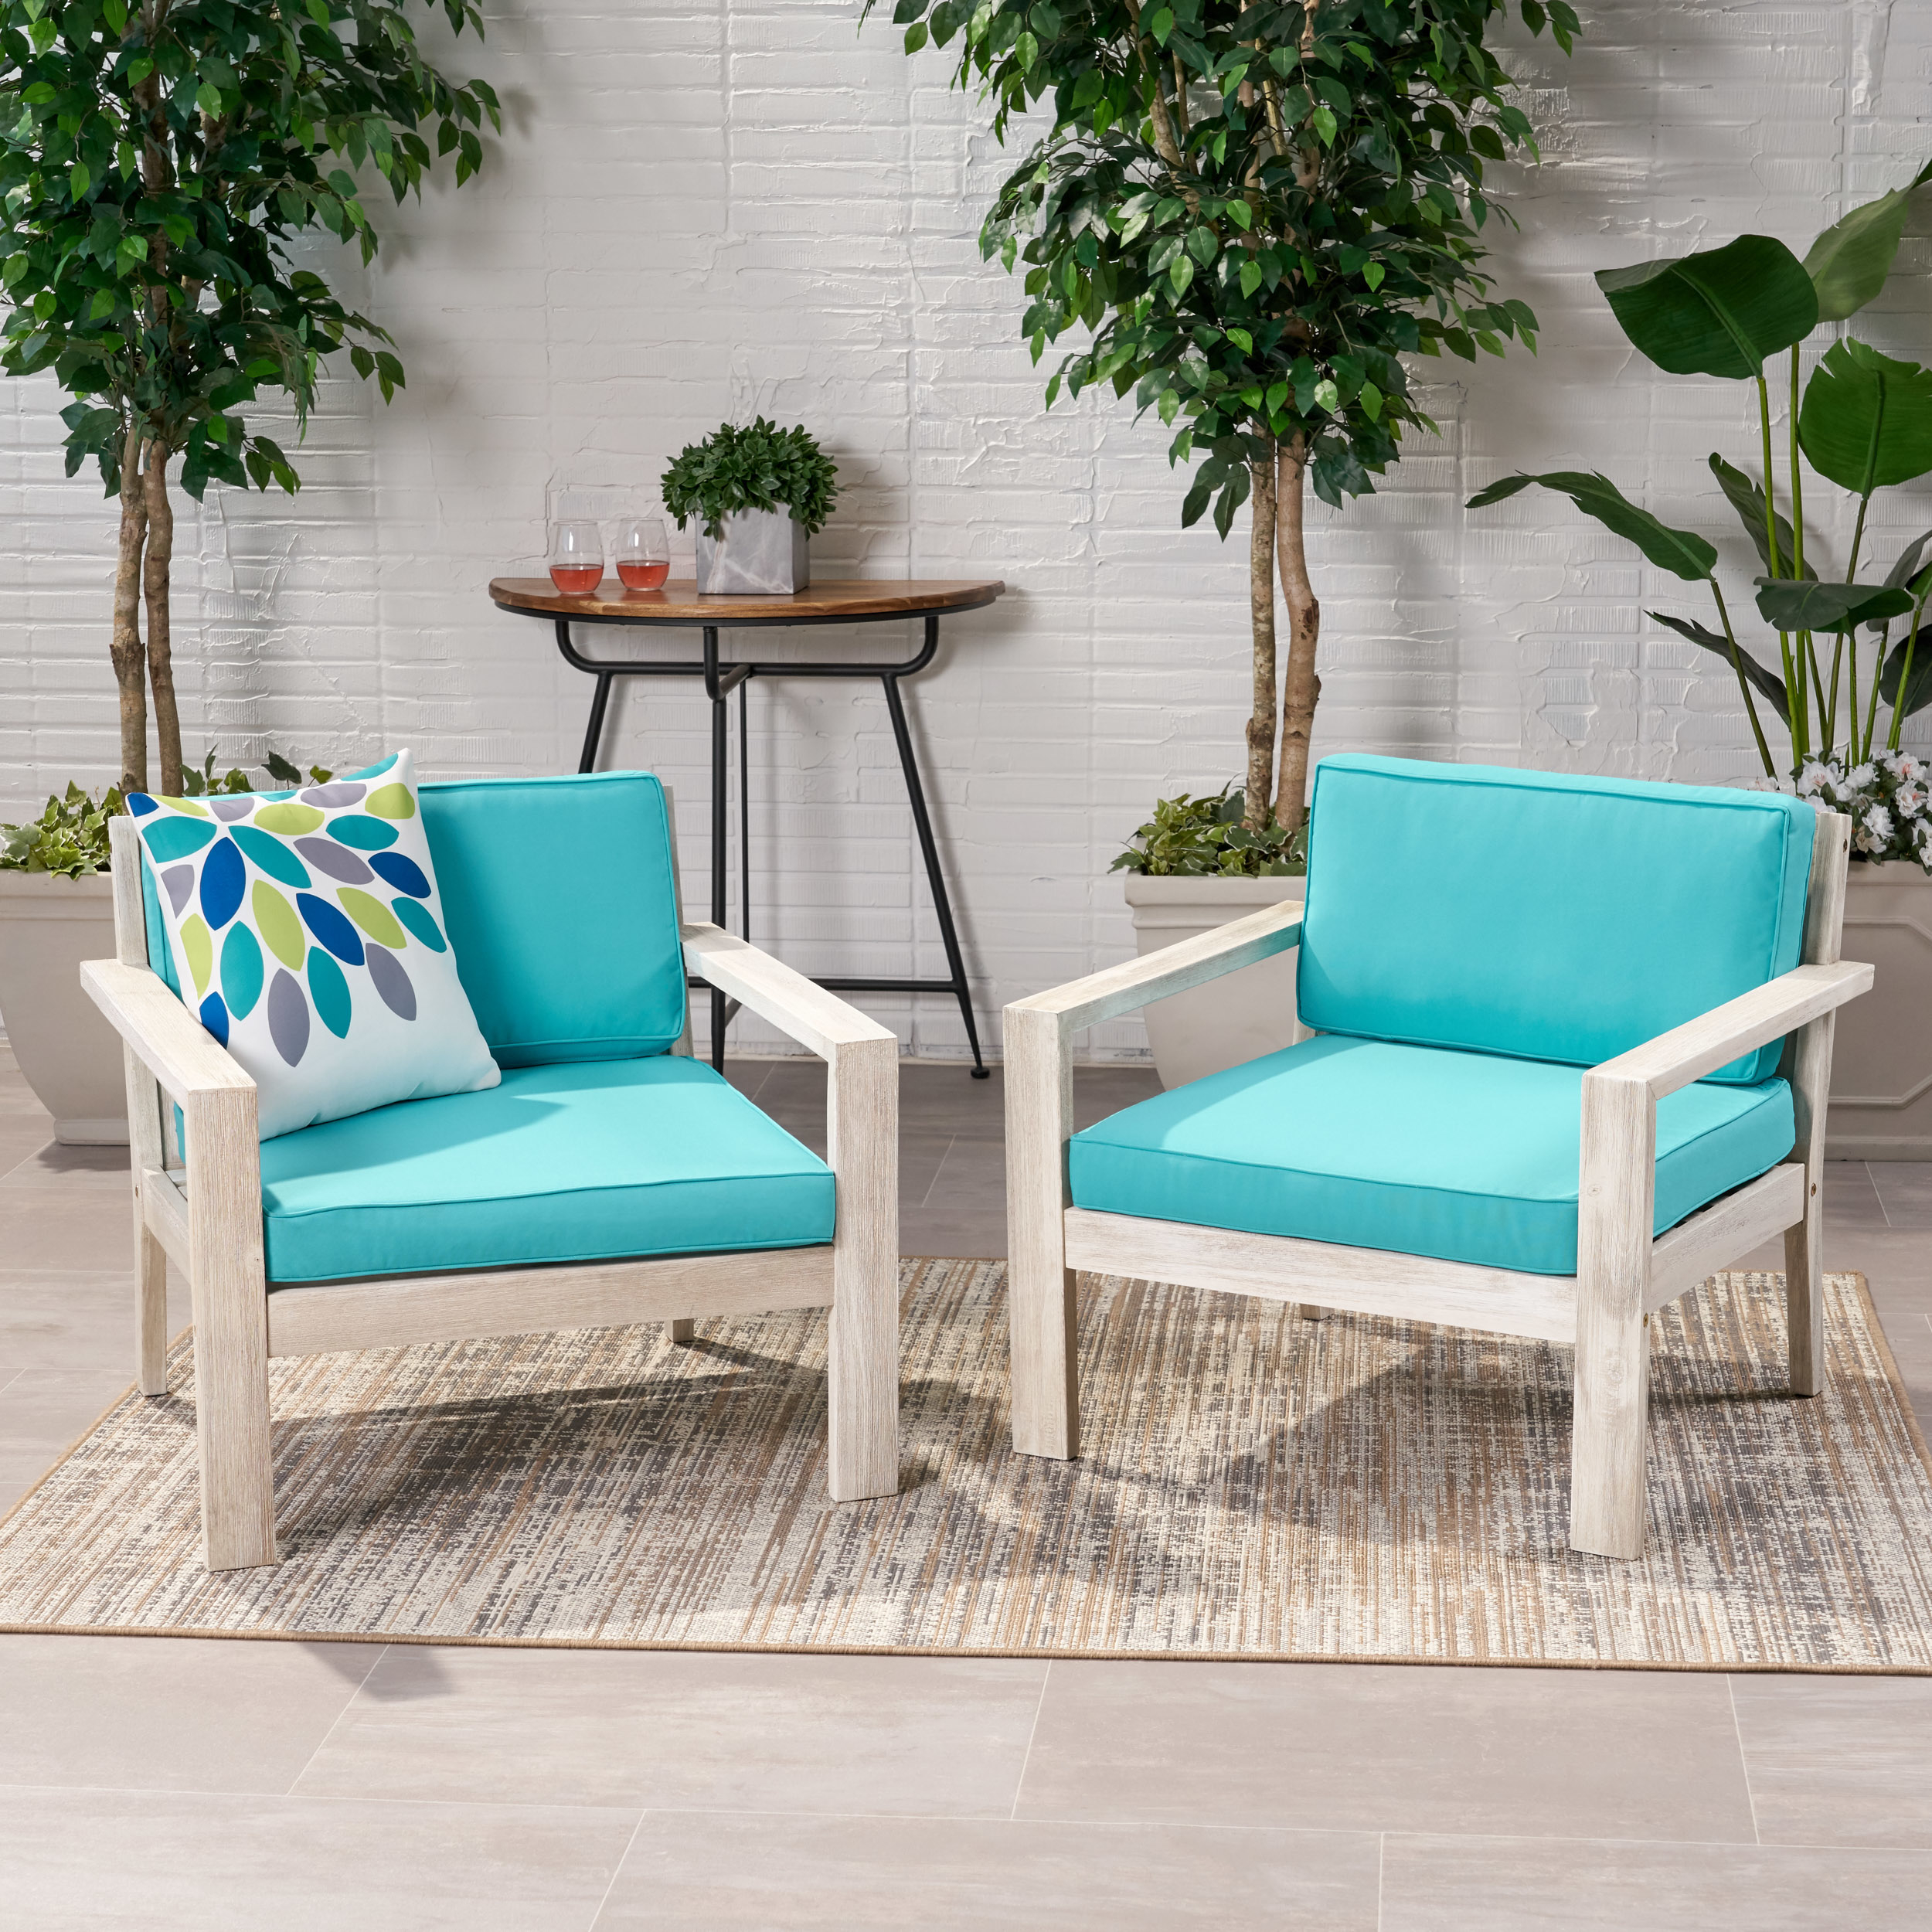 Beryl Outdoor Acacia Wood Club Chairs With Cushions (Set Of 2) - Brushed Light Gray Wash, Teal